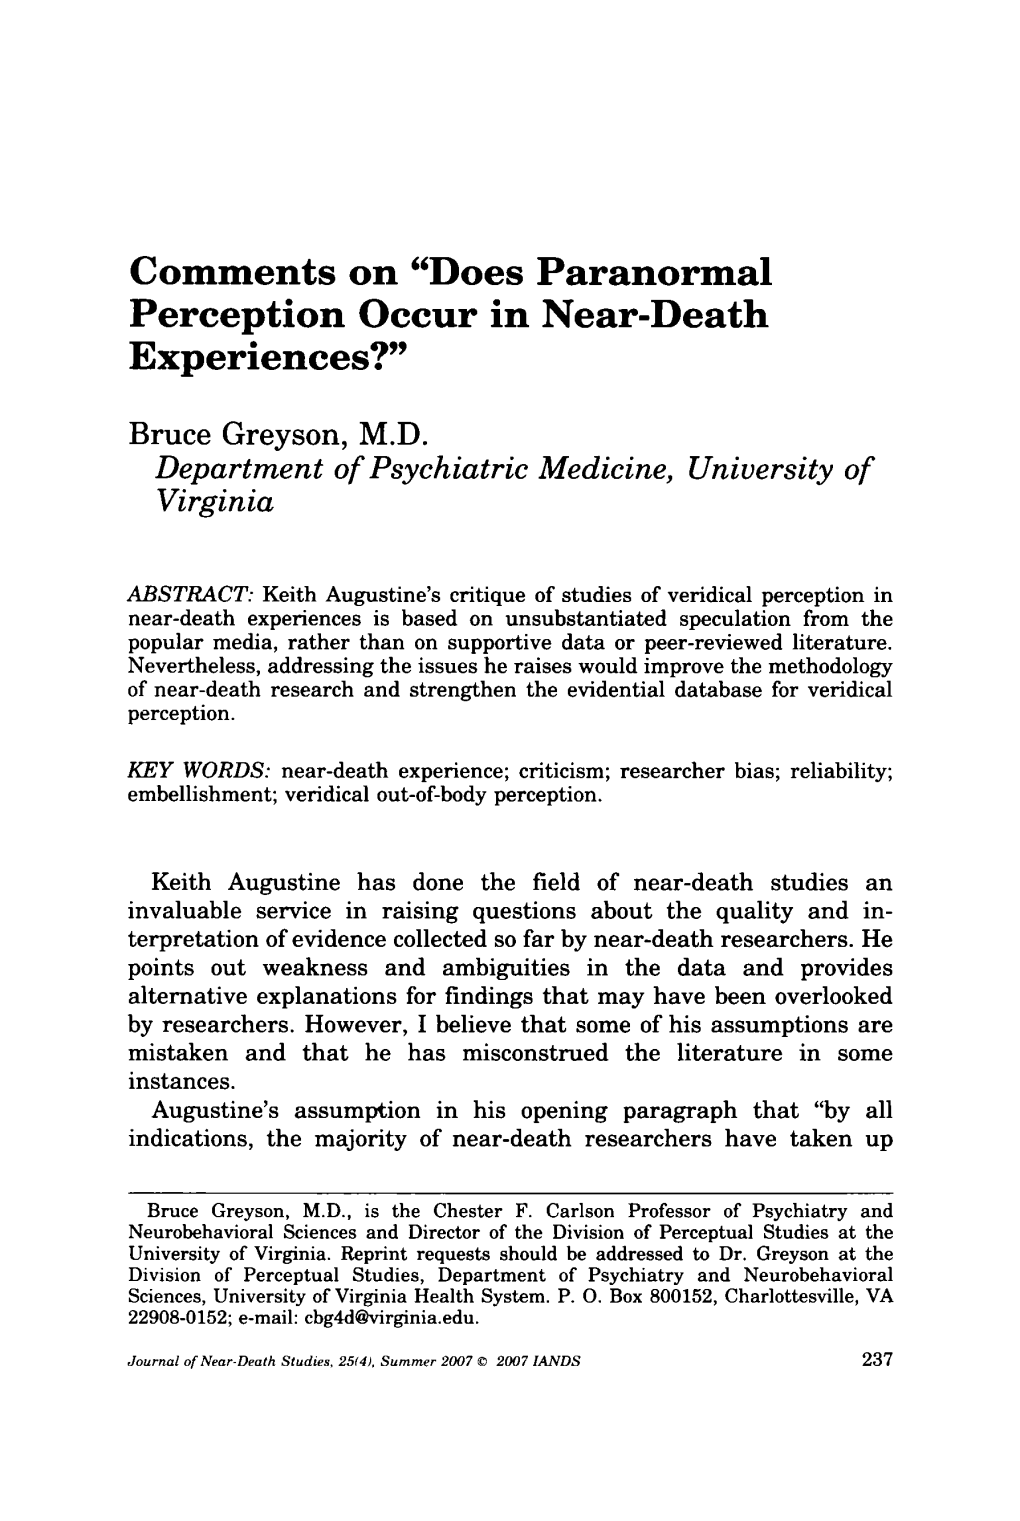 Does Paranormal Perception Occur in Near-Death Experiences?"